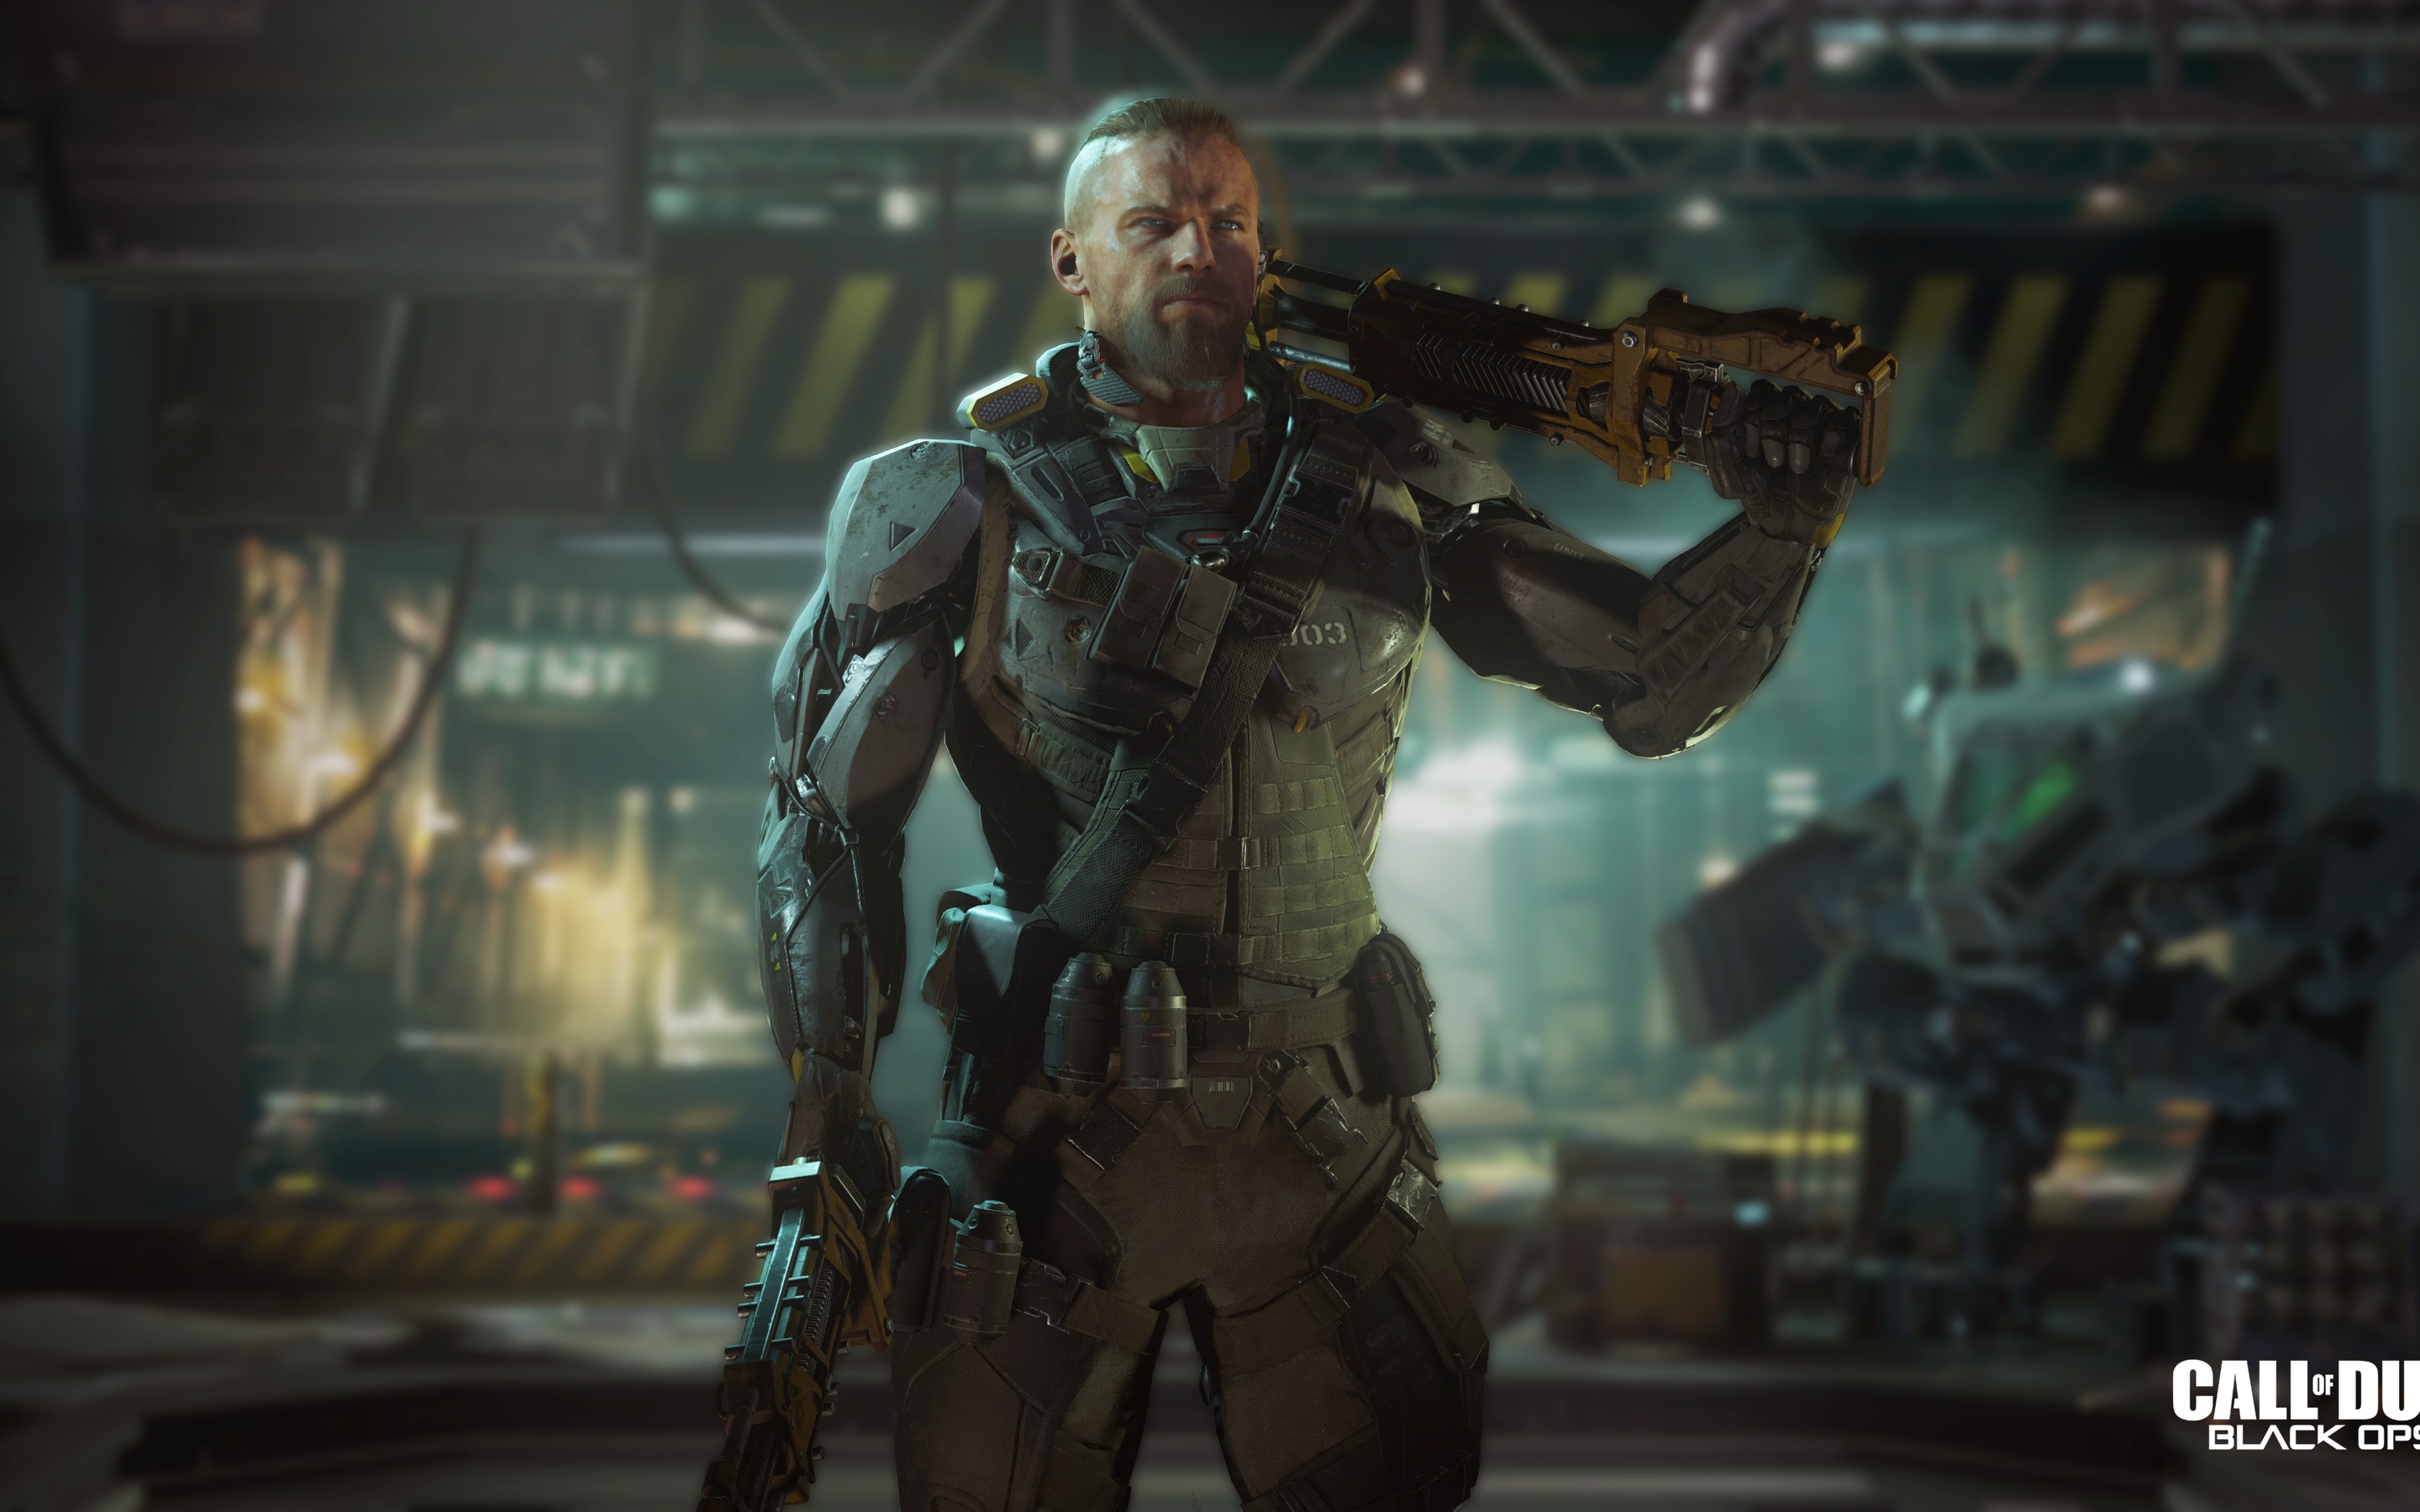 Call of Duty Black Ops 3 Specialist Ruin for 2880 x 1800 Retina Display resolution